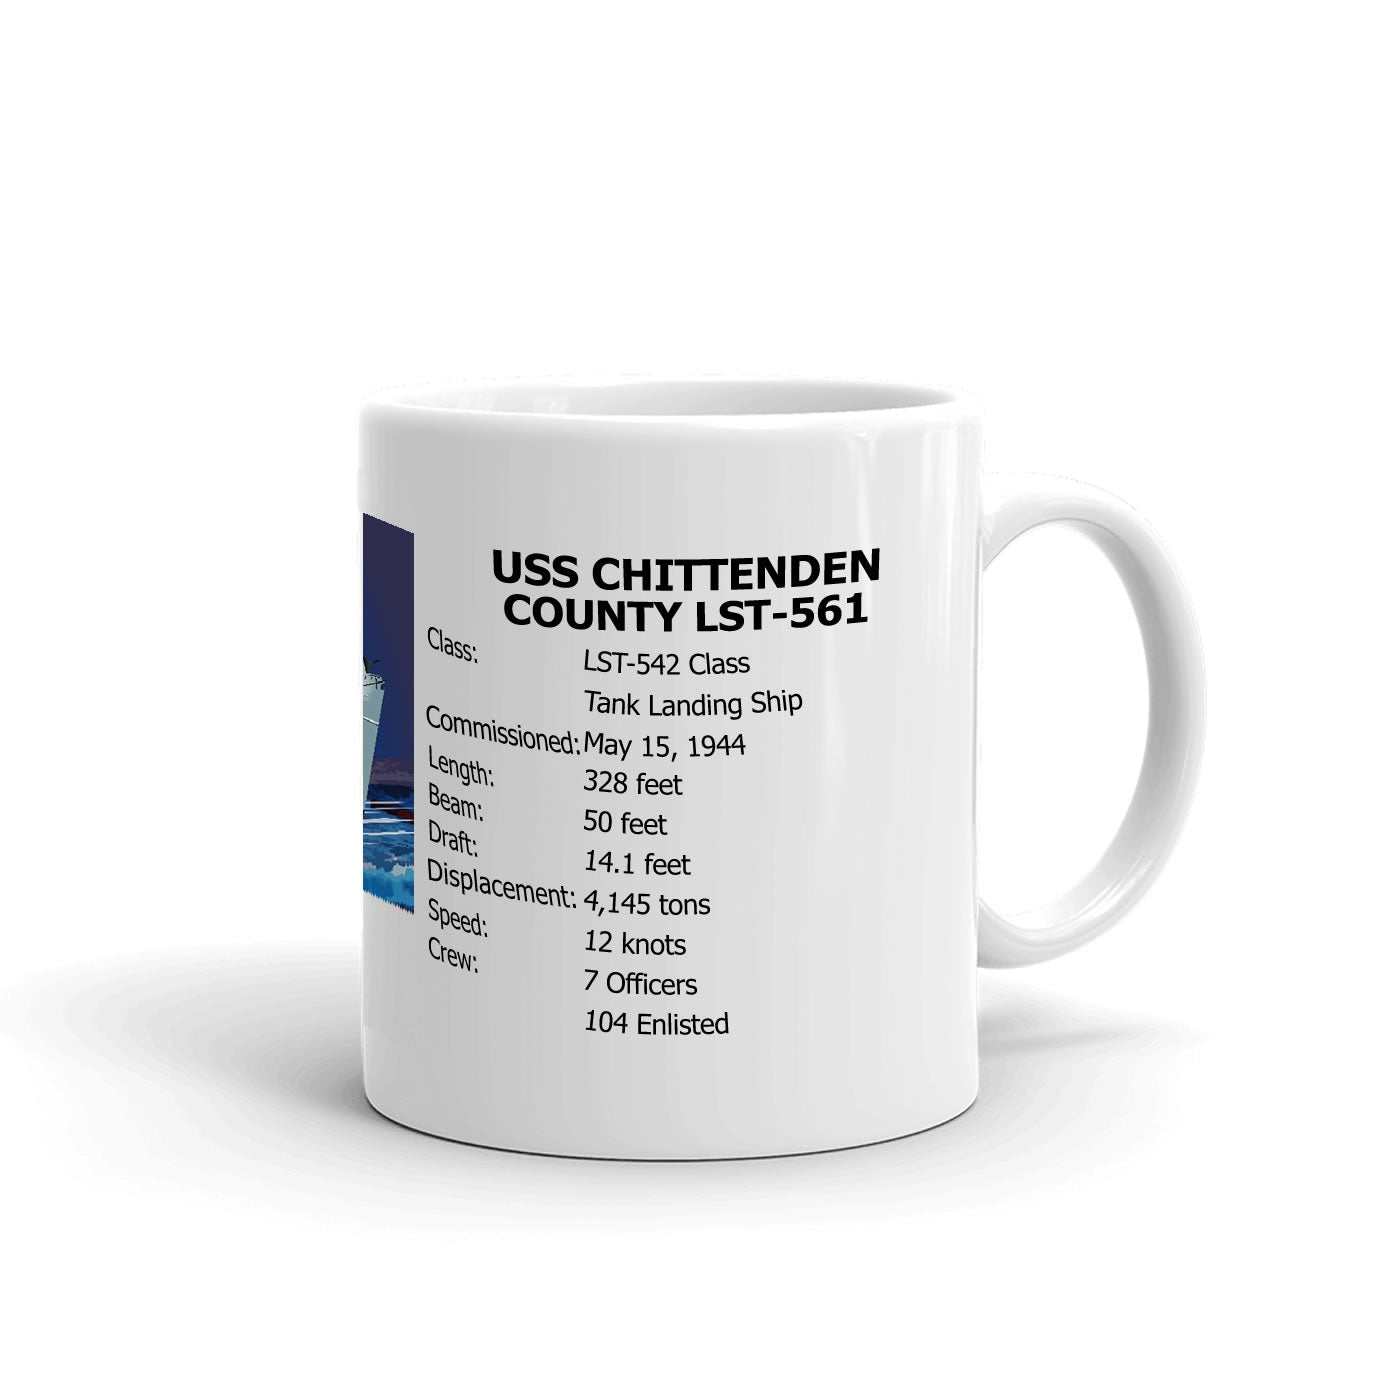 USS Chittenden County LST-561 Coffee Cup Mug Right Handle